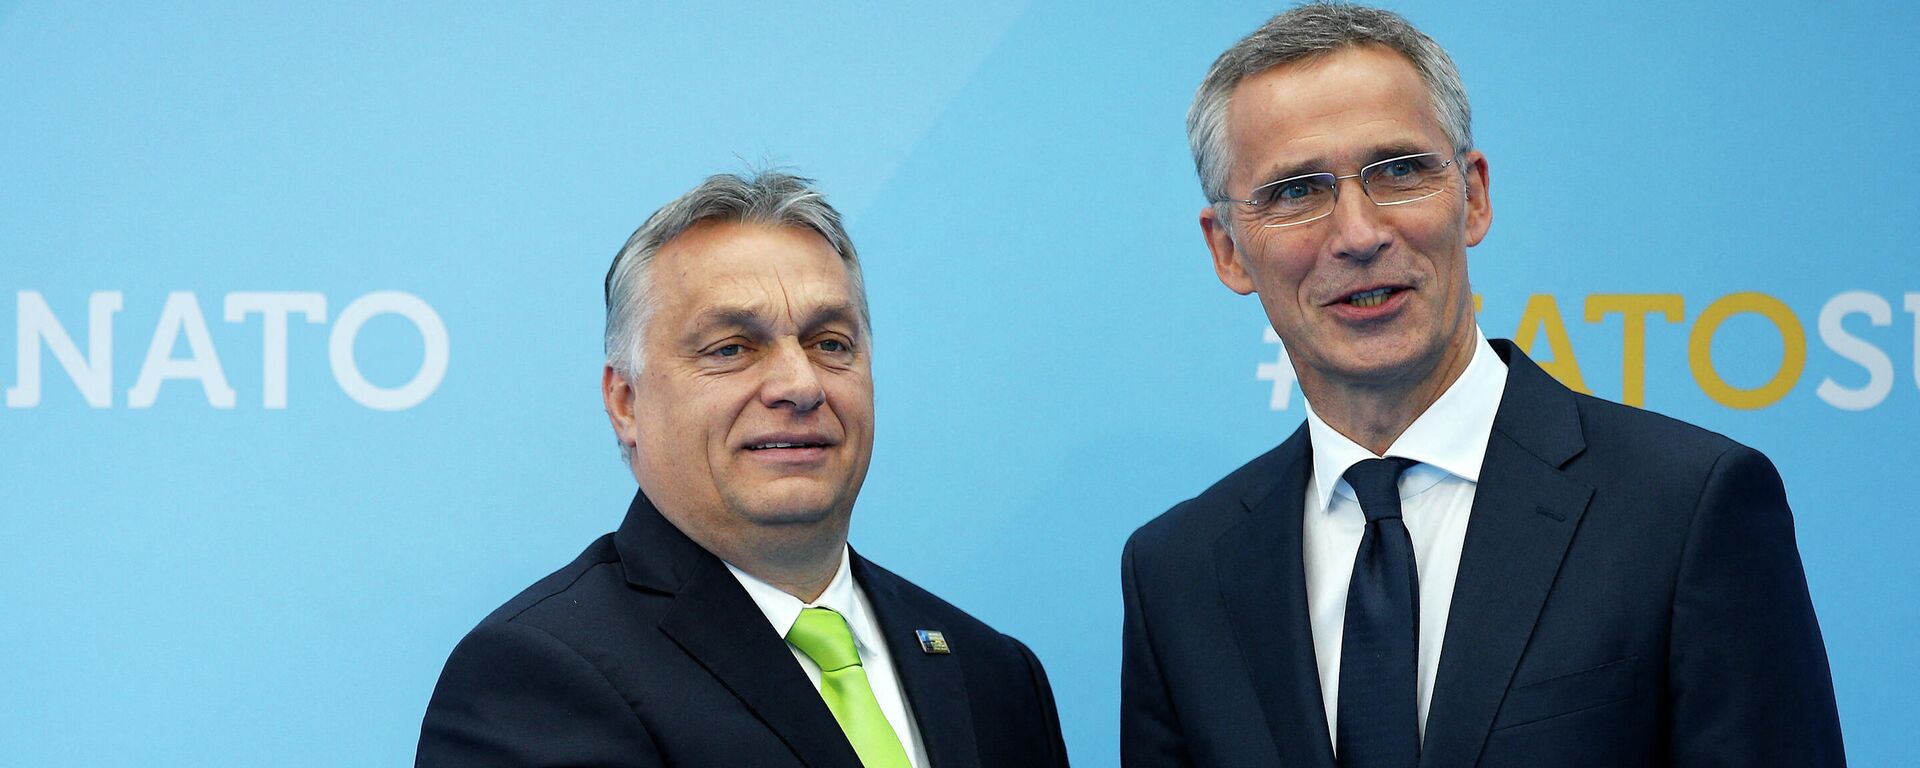 Hungarian Prime Minister Viktor Orban (L) is welcomed by NATO Secretary General Jens Stoltenberg (R) as he arrives for the NATO (North Atlantic Treaty Organization) summit, at the NATO headquarters in Brussels, on July 11, 2018. - Sputnik International, 1920, 24.01.2024